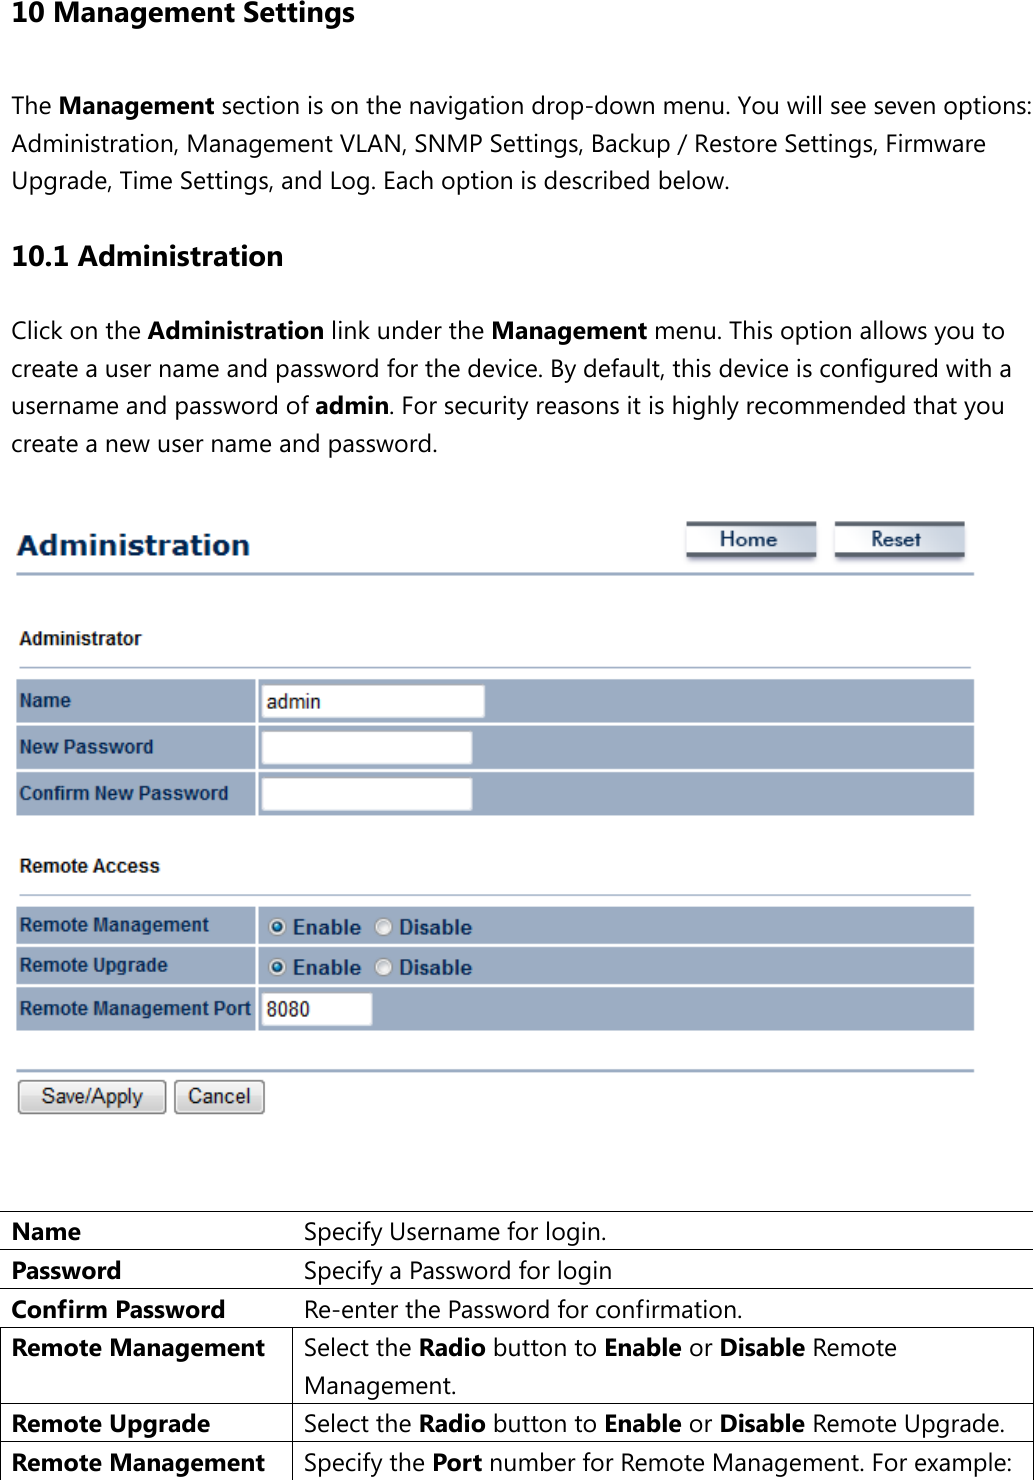 10 Management Settings The Management section is on the navigation drop-down menu. You will see seven options: Administration, Management VLAN, SNMP Settings, Backup / Restore Settings, Firmware Upgrade, Time Settings, and Log. Each option is described below. 10.1 Administration Click on the Administration link under the Management menu. This option allows you to create a user name and password for the device. By default, this device is configured with a username and password of admin. For security reasons it is highly recommended that you create a new user name and password.     Name  Specify Username for login. Password  Specify a Password for login Confirm Password Re-enter the Password for confirmation. Remote Management Select the Radio button to Enable or Disable Remote Management. Remote Upgrade Select the Radio button to Enable or Disable Remote Upgrade. Remote Management  Specify the Port number for Remote Management. For example: 